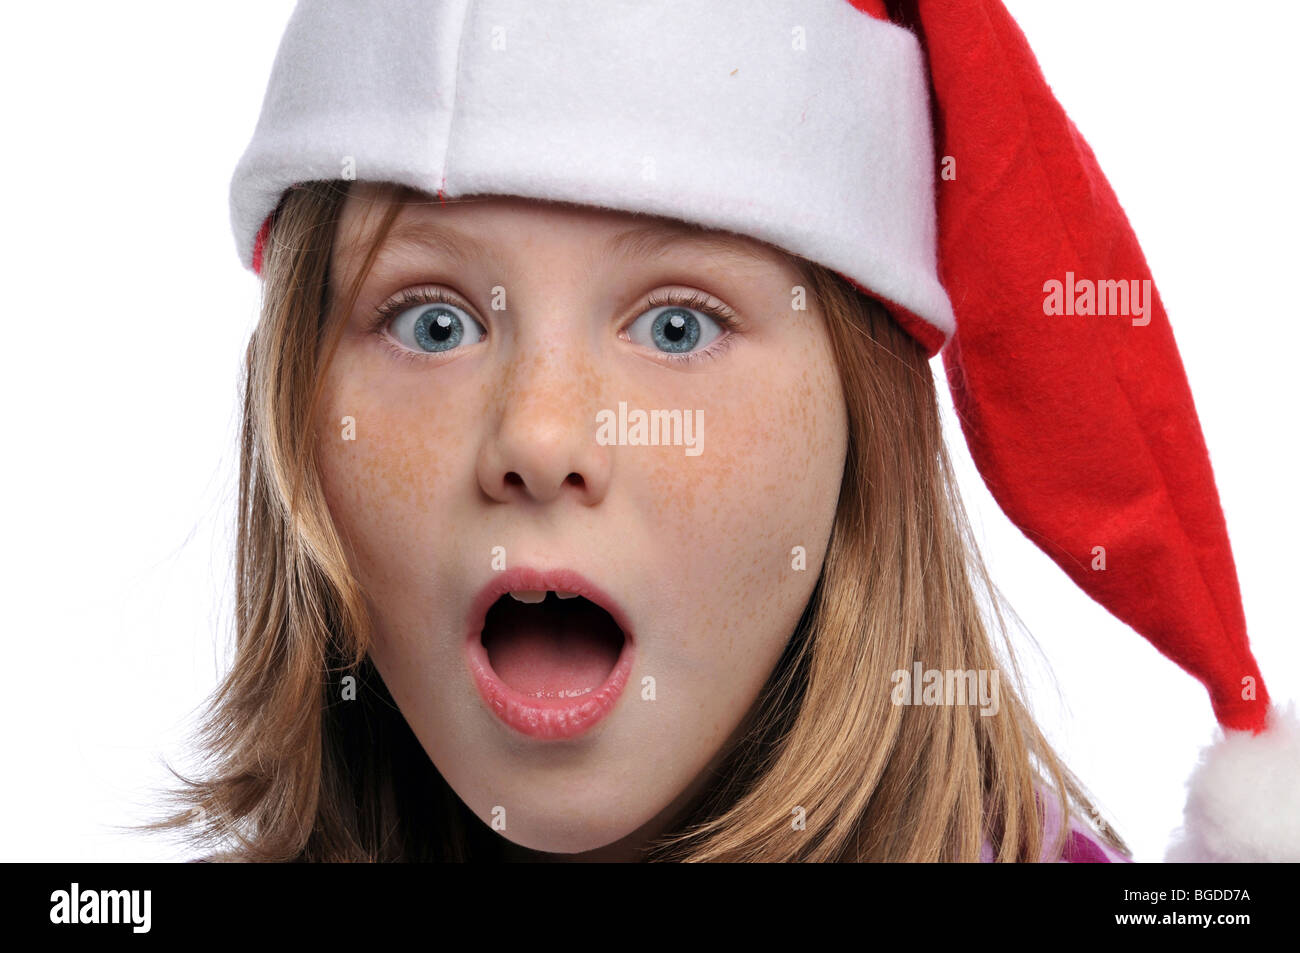 Titlle girl's portrait wearing a Santa's hat isolated on a white background Stock Photo